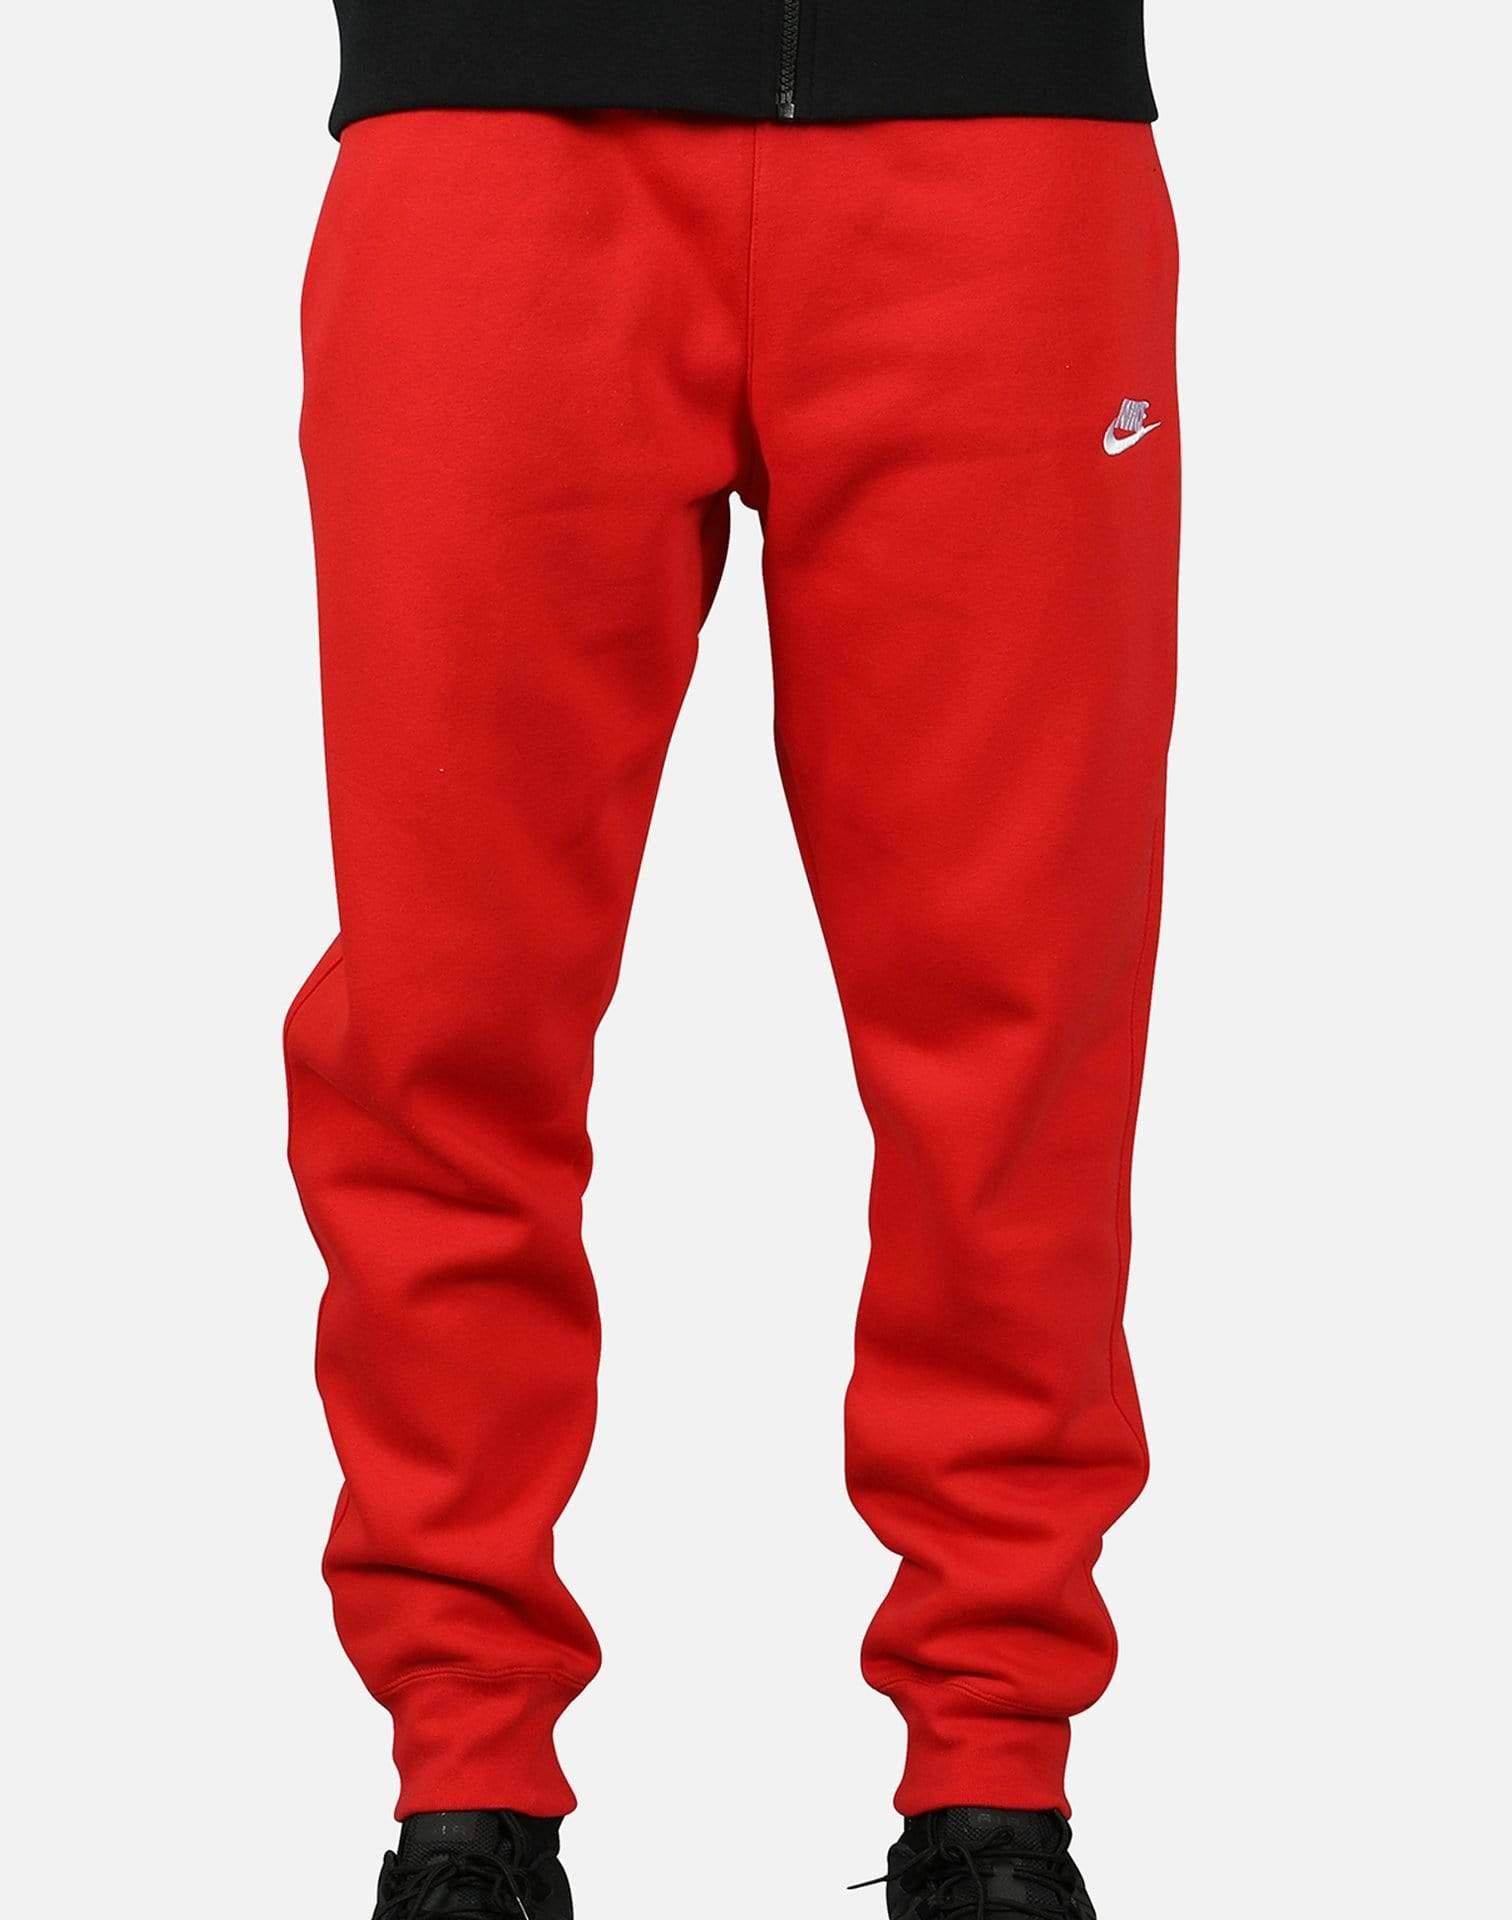 Nike Cotton Nsw Club Jogger Pant in Red/Black (Red) for Men - Save 55% ...